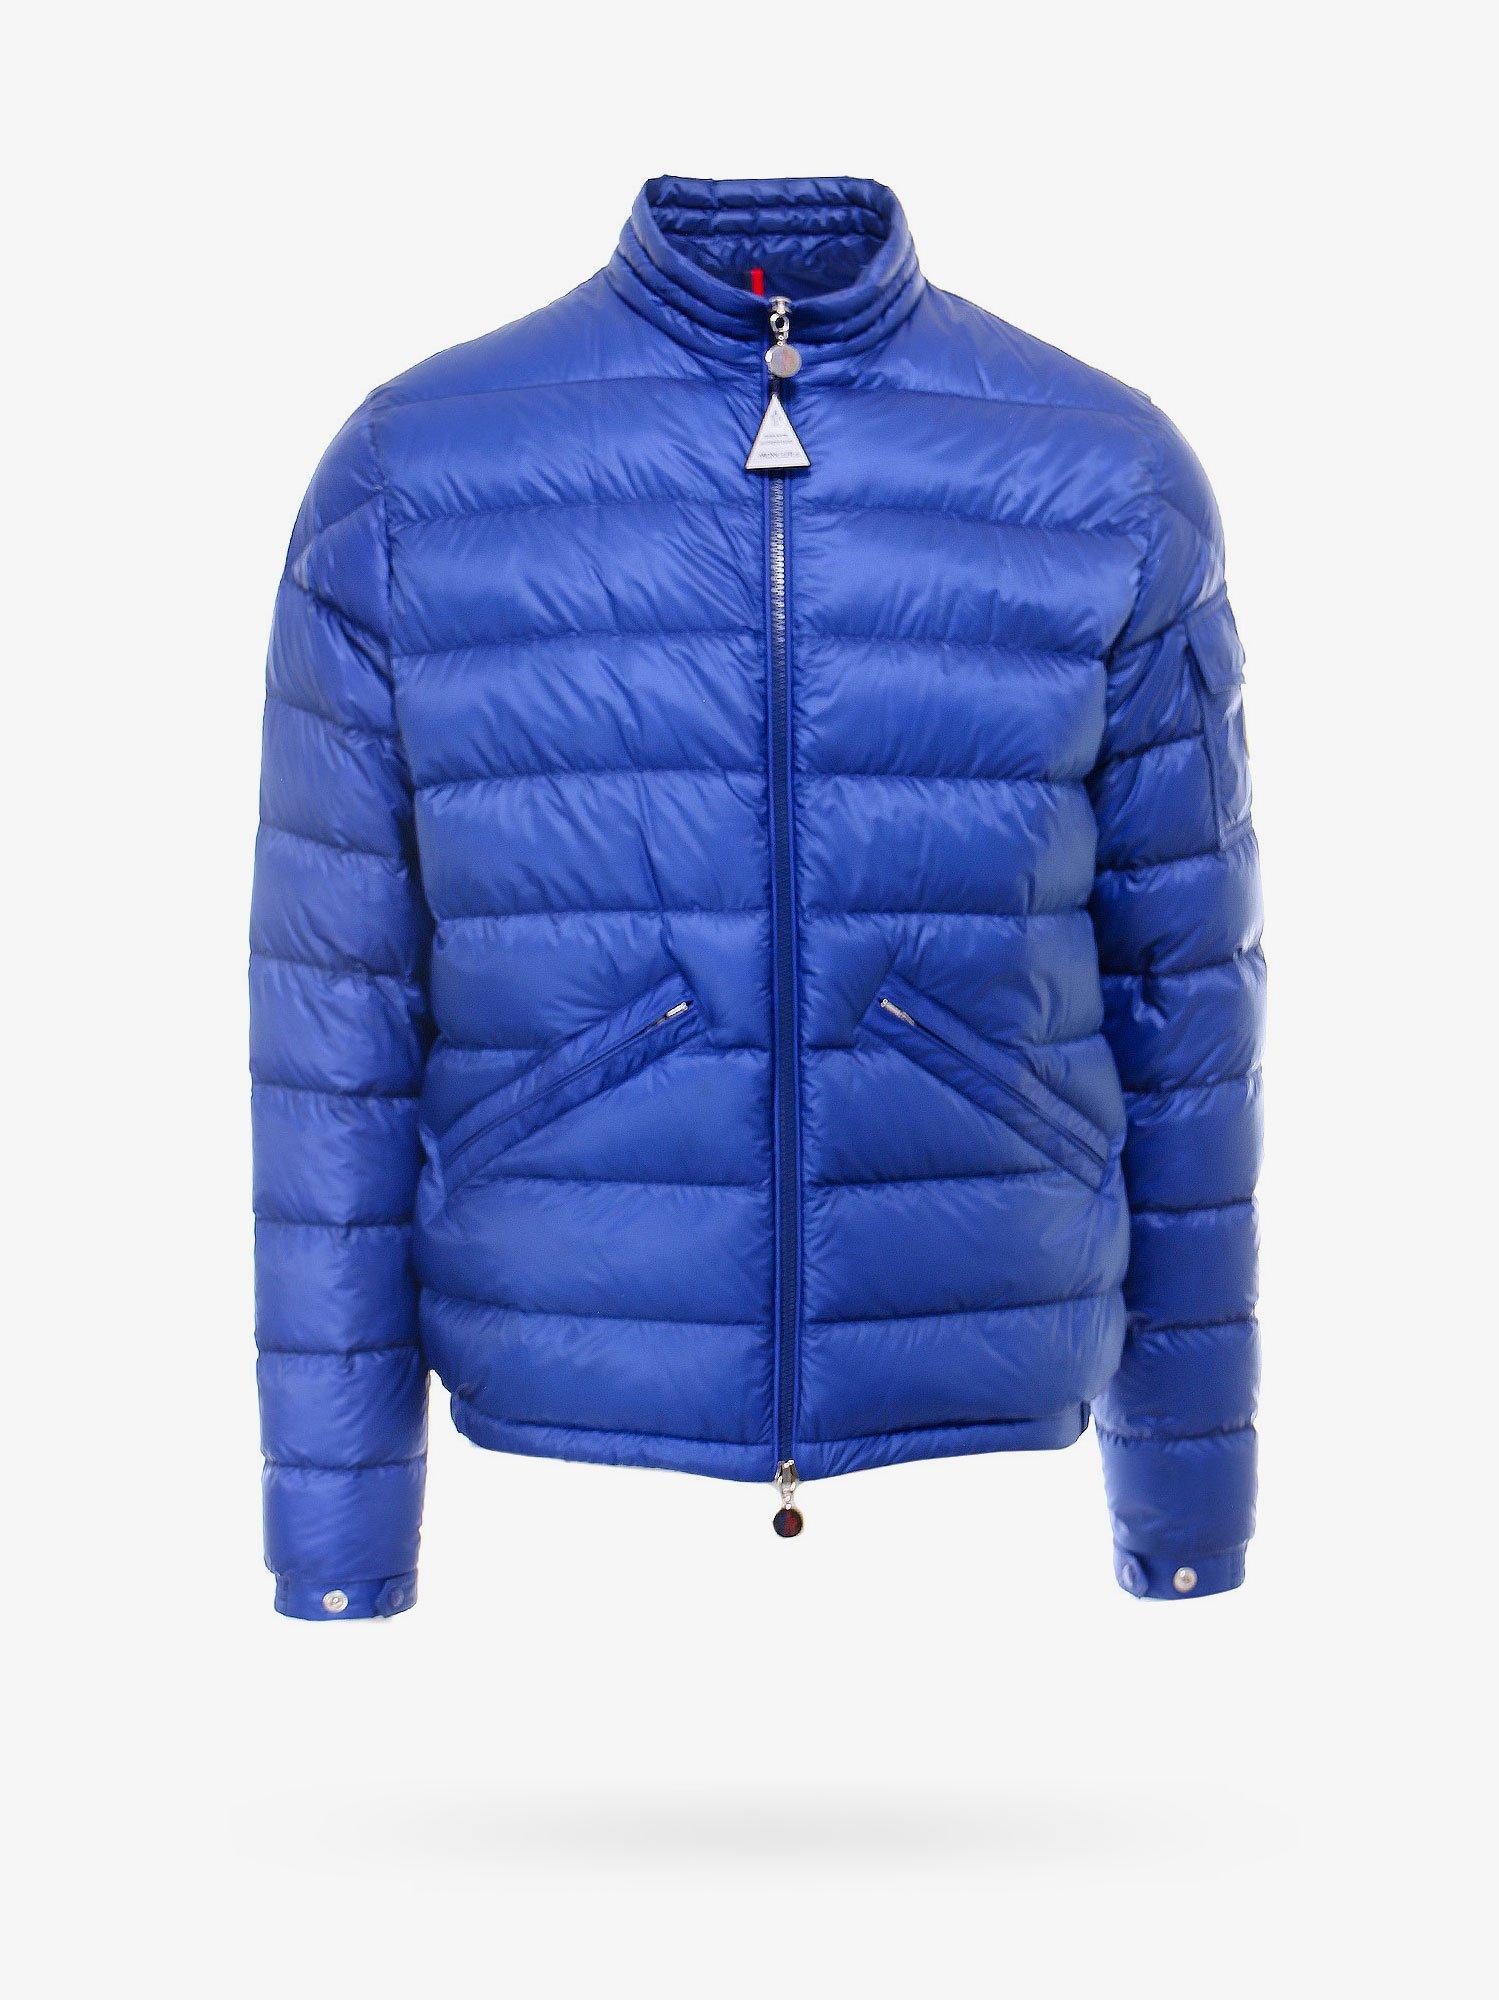 Moncler Synthetic Down Agay Jacket in Blue for Men - Save 50% - Lyst